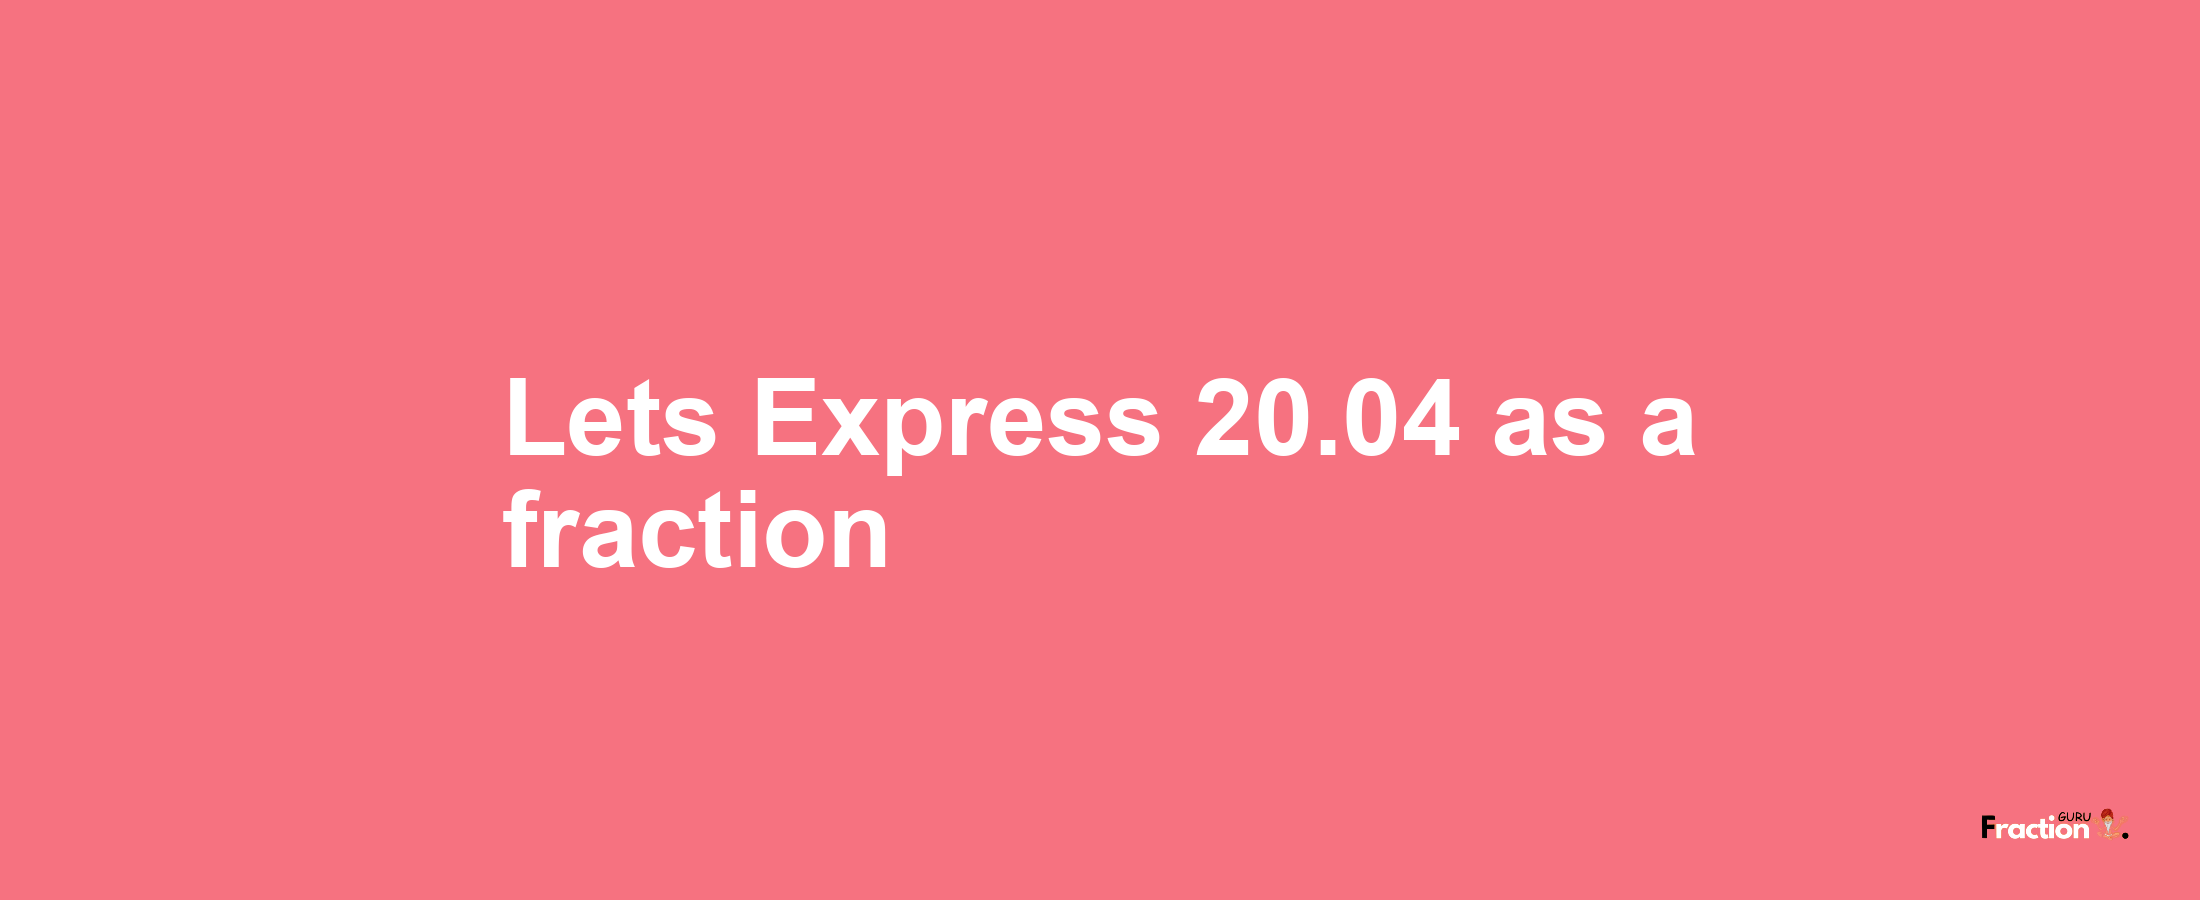 Lets Express 20.04 as afraction